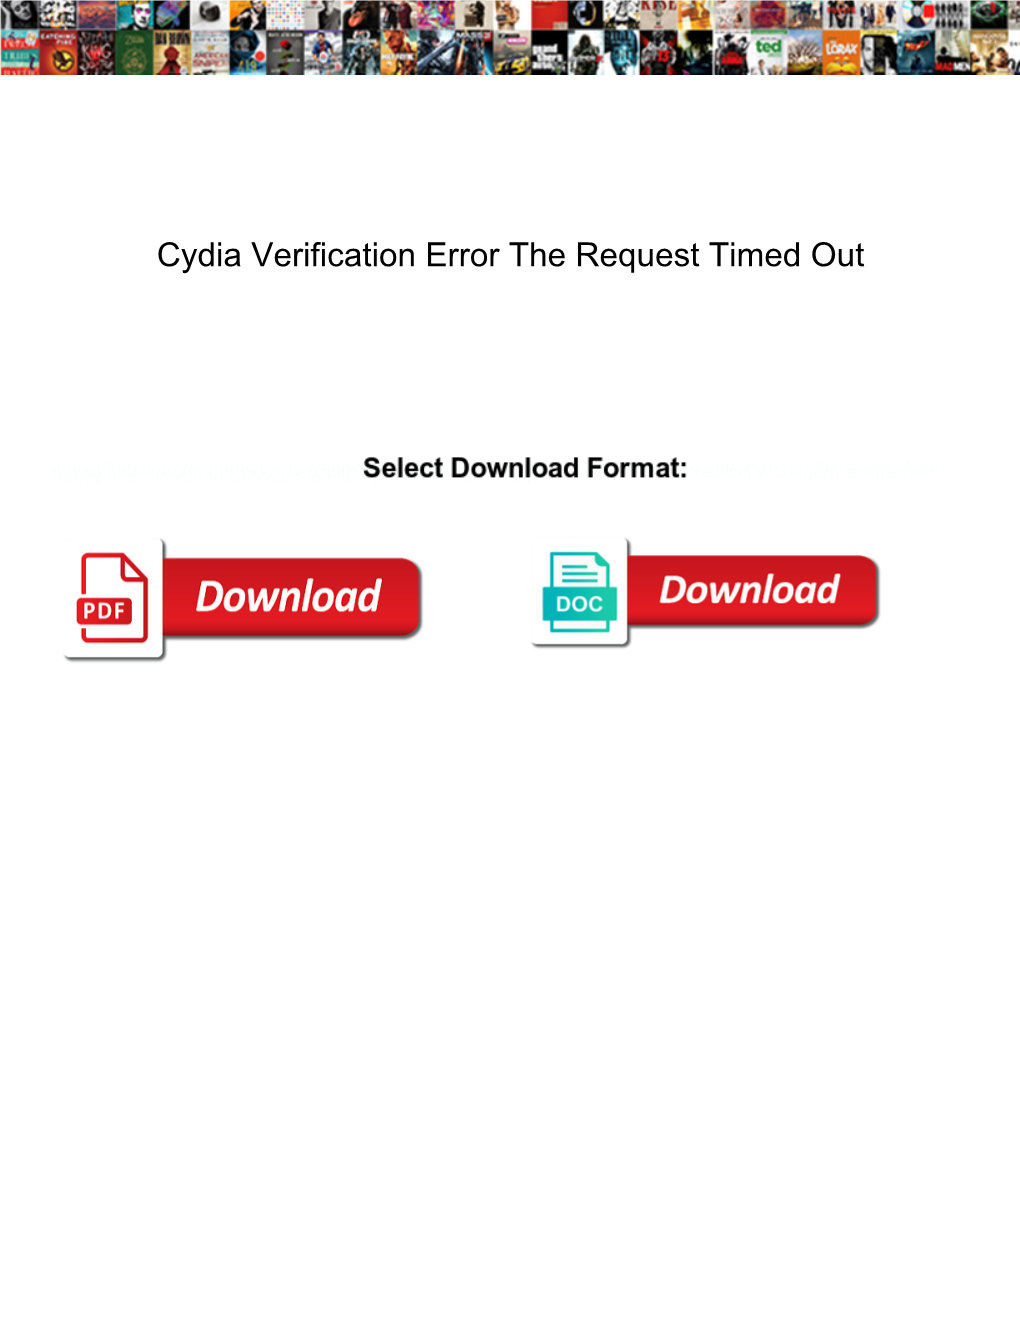 Cydia Verification Error the Request Timed Out